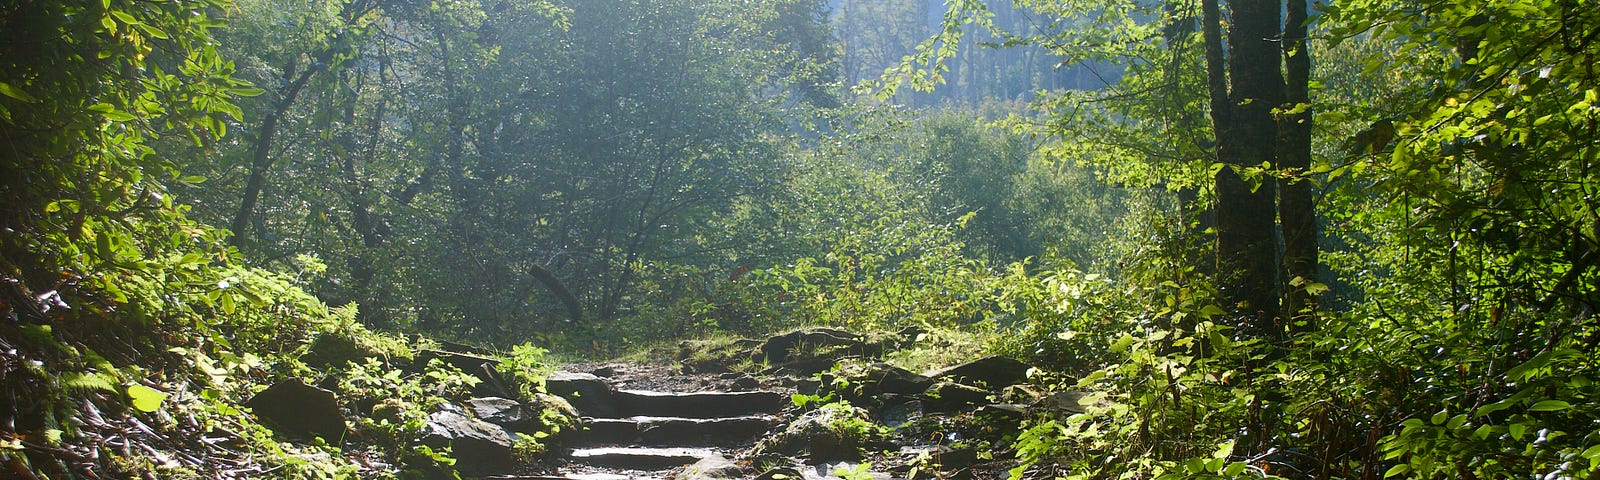 stone steps on a path leading through a forest